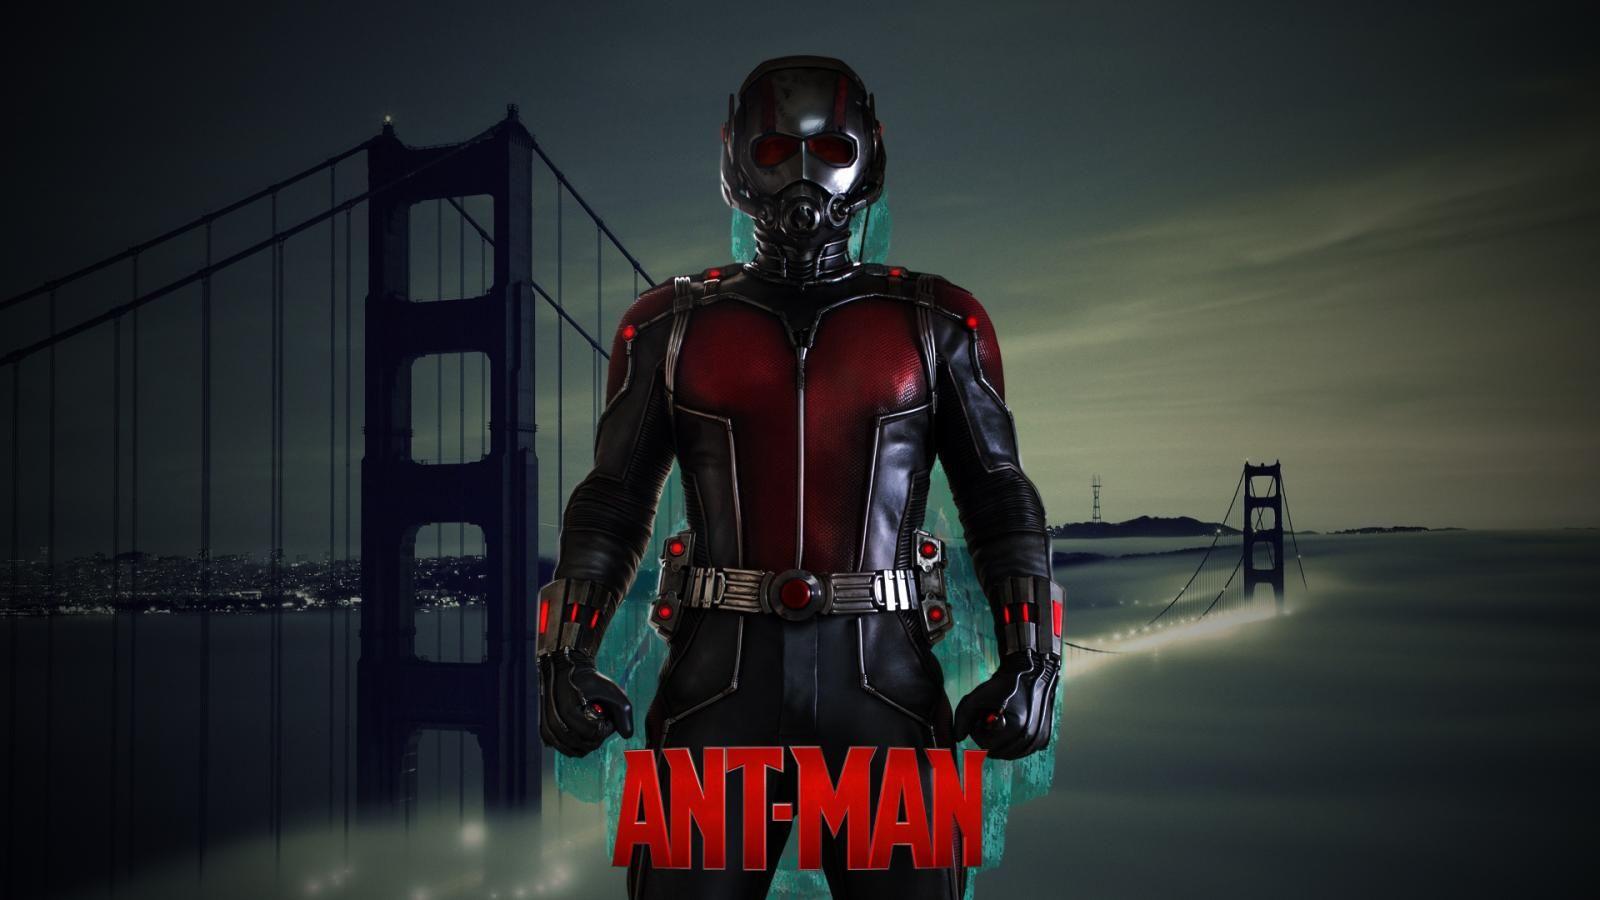 Bad Ass Ant Man Wallpaper By HD Wallpaper Daily